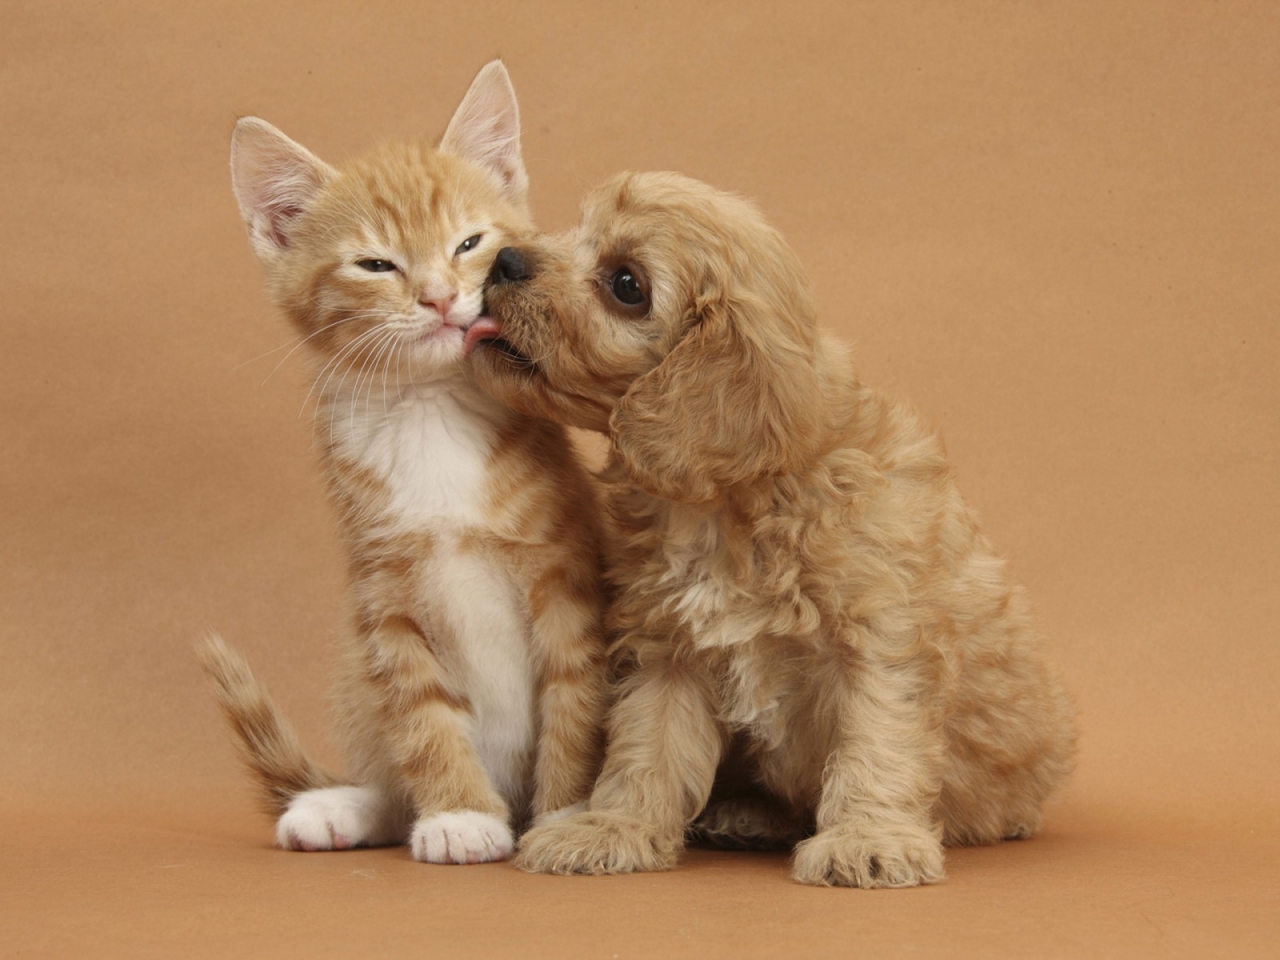 Dog and Cat Kissing for 1280 x 960 resolution